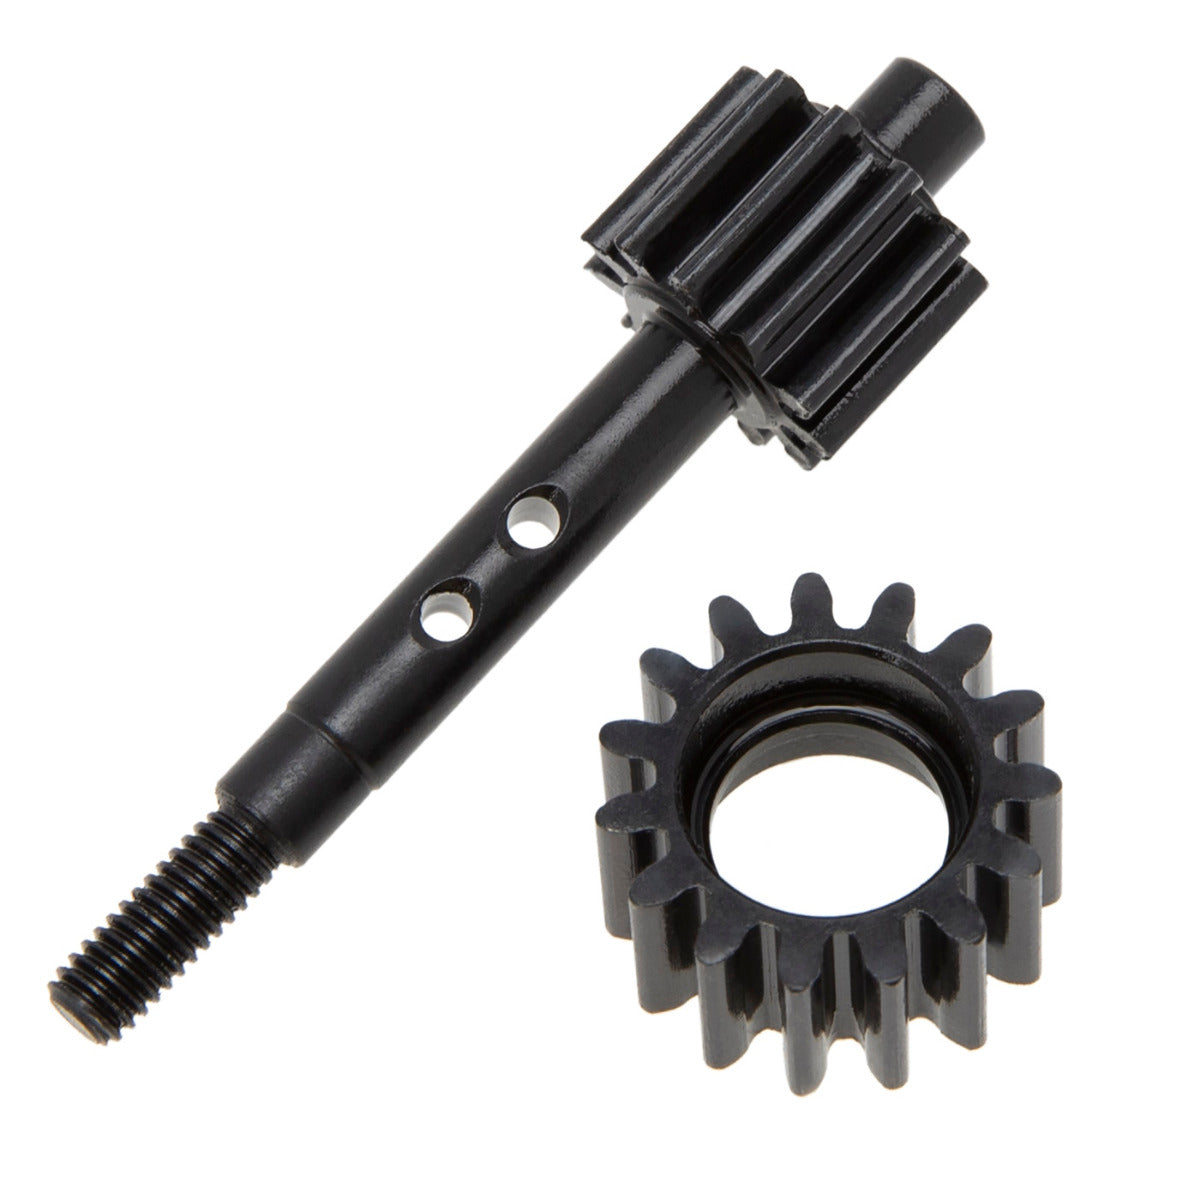 Transmission Gear for 272 Gearbox (gear set reduction ratio 2.73:1) FOR Traxxas Slash 2WD - PowerHobby